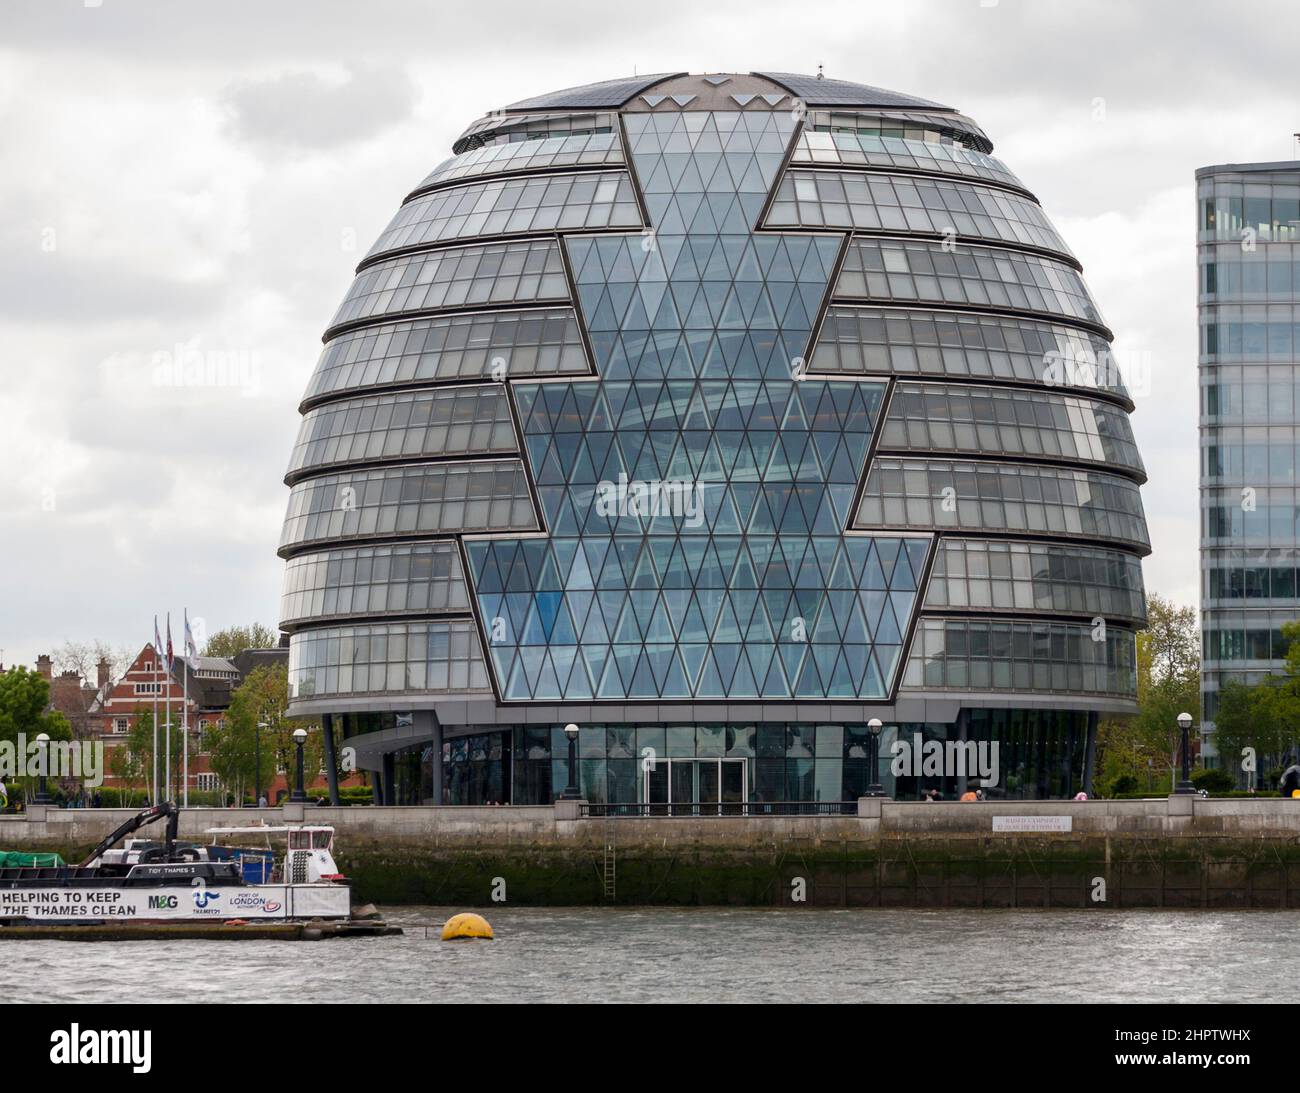 London's 'Glass Egg' by Nornman Foster: The Glass Egg, Sir Norman Foster architect 2002 is planted on the banks of the Thames River in East London. Stock Photo